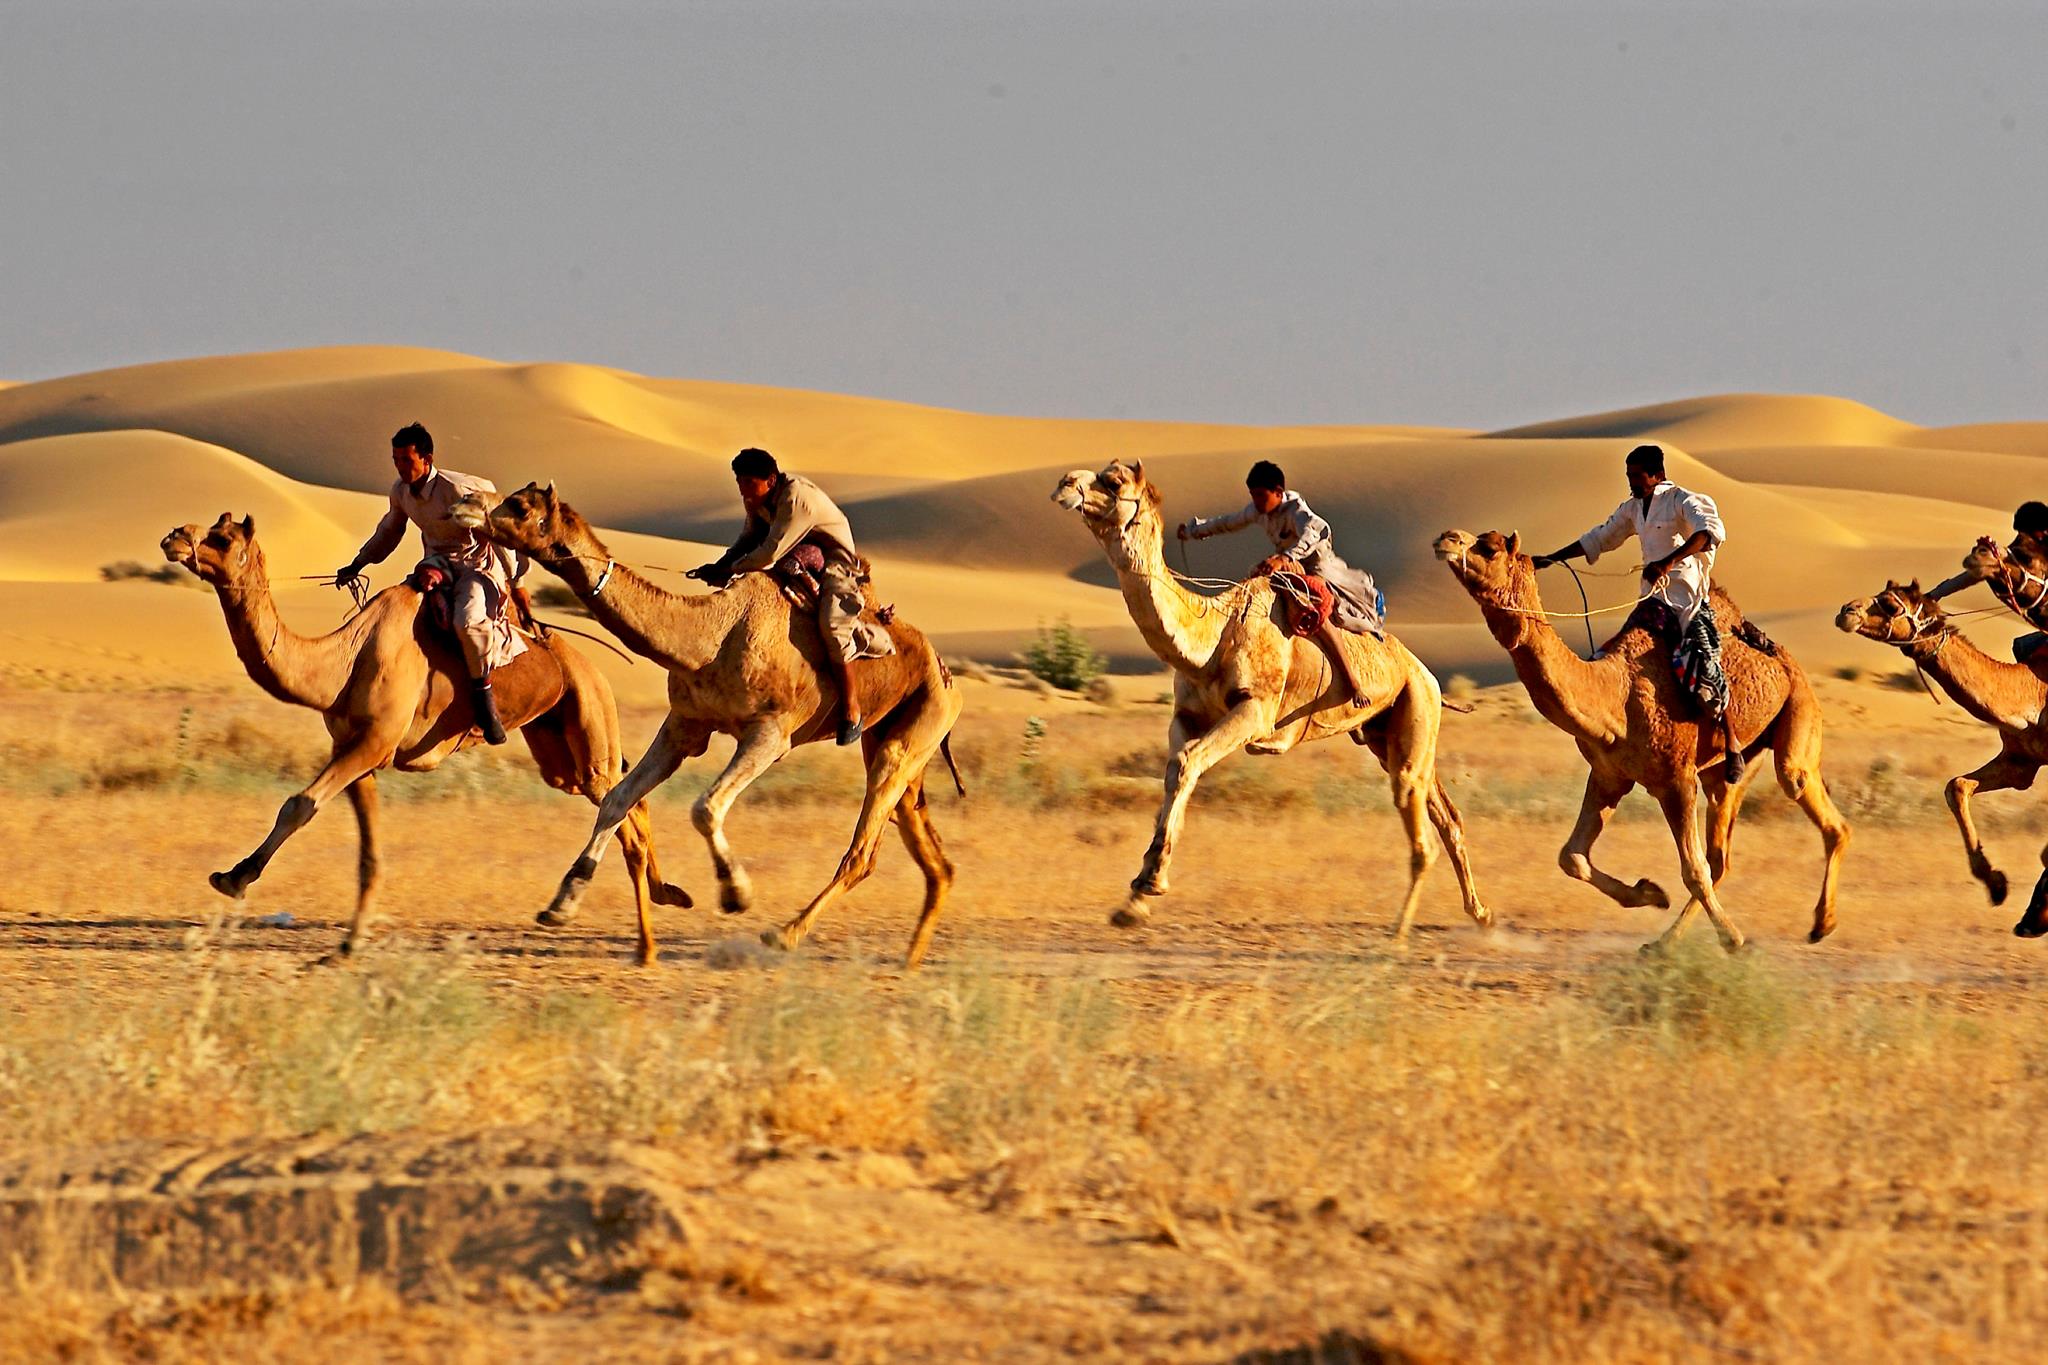 Desert Festival Tours in Rajasthan with Camel Safari Tours in Rajasthan